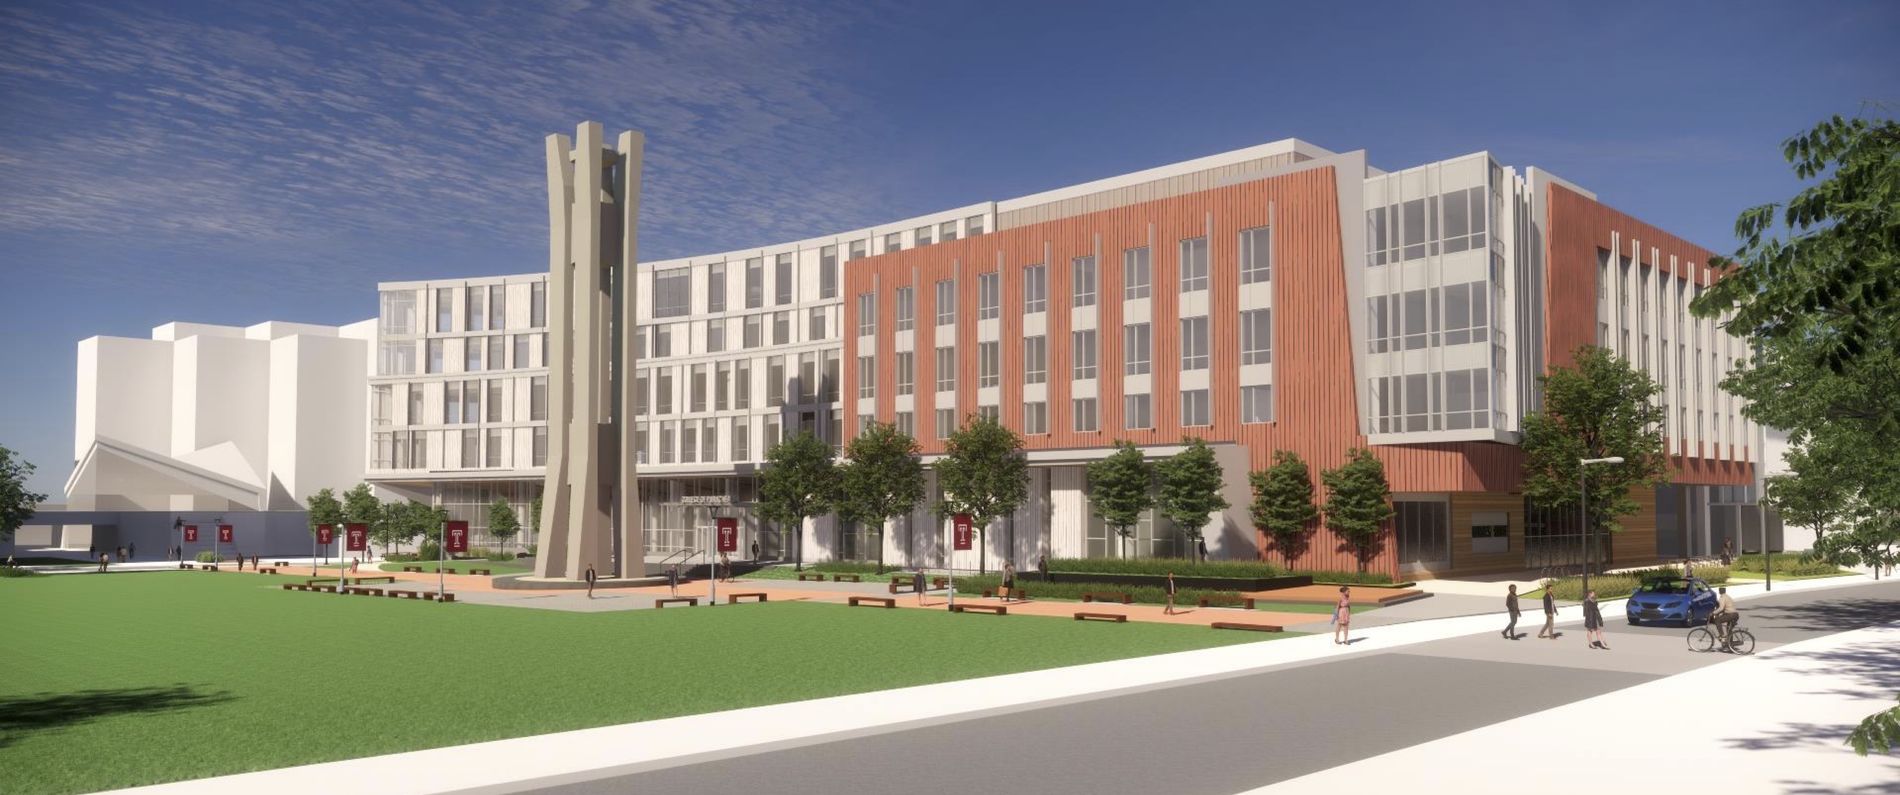 Architectural rendering of the renovated Paley Hall